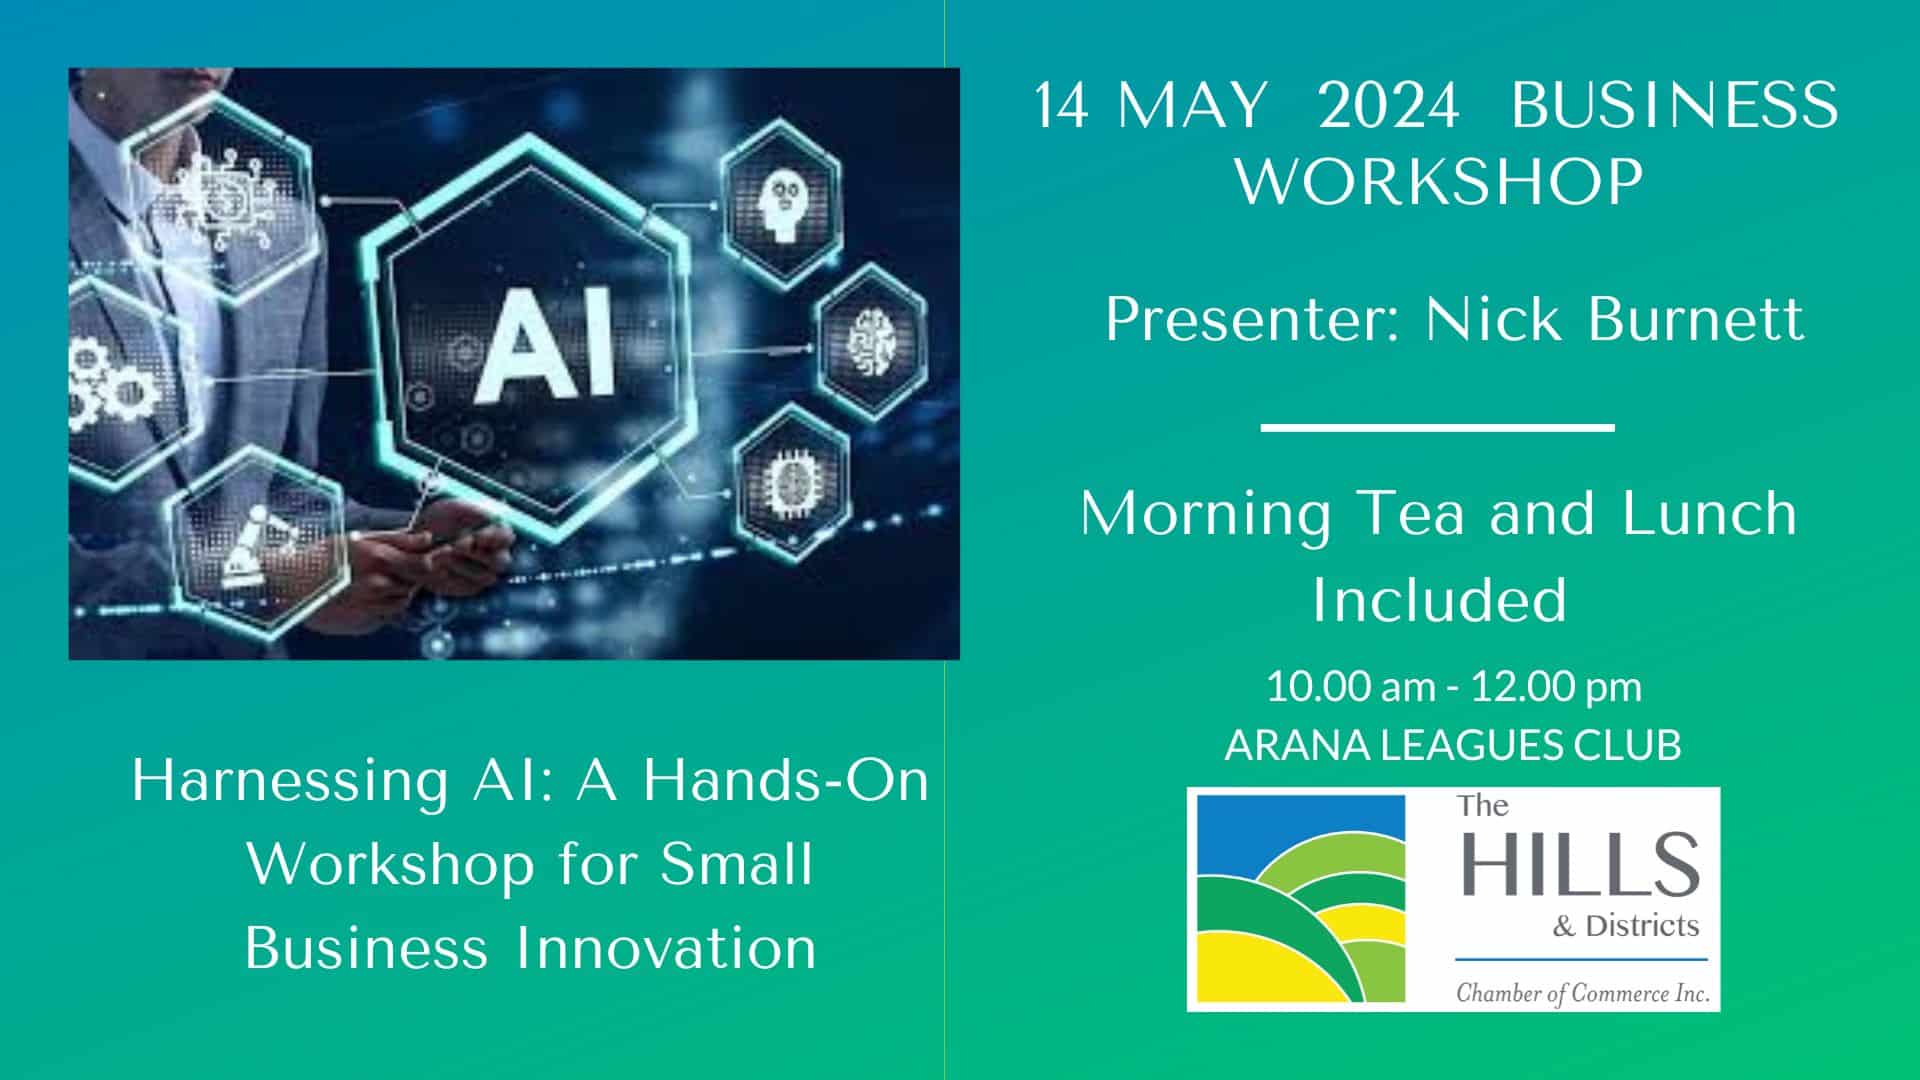 Business Development » Harnessing AI: A Hands-On Workshop for Small Business Innovation – May 2024 Business Workshop Series